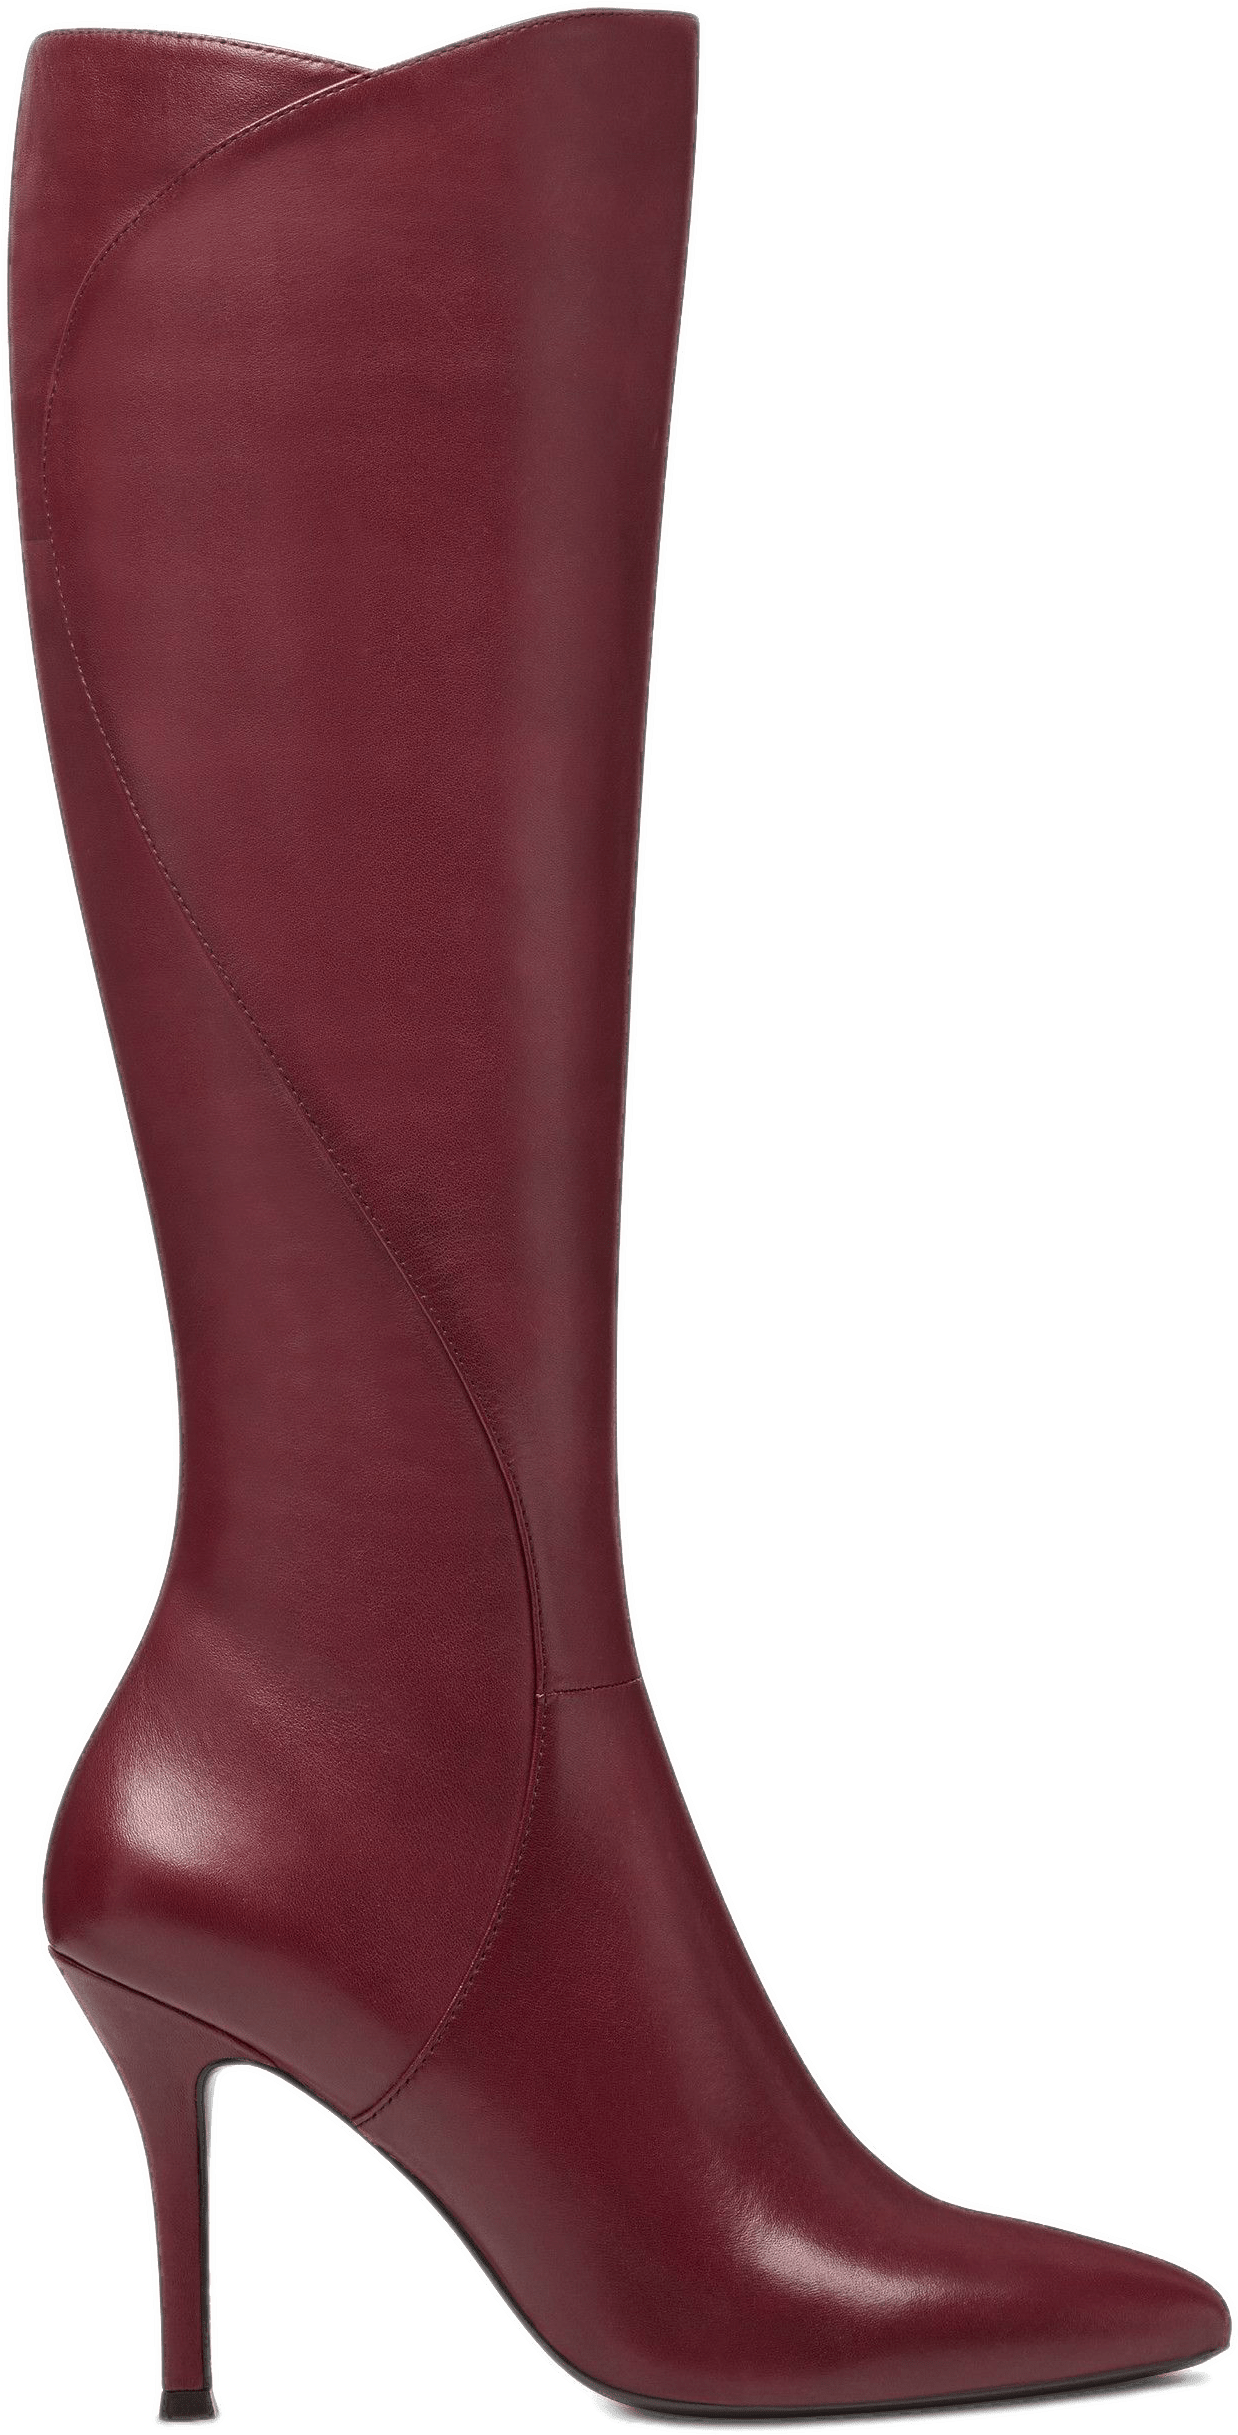 Womens Boots PNG Clipart